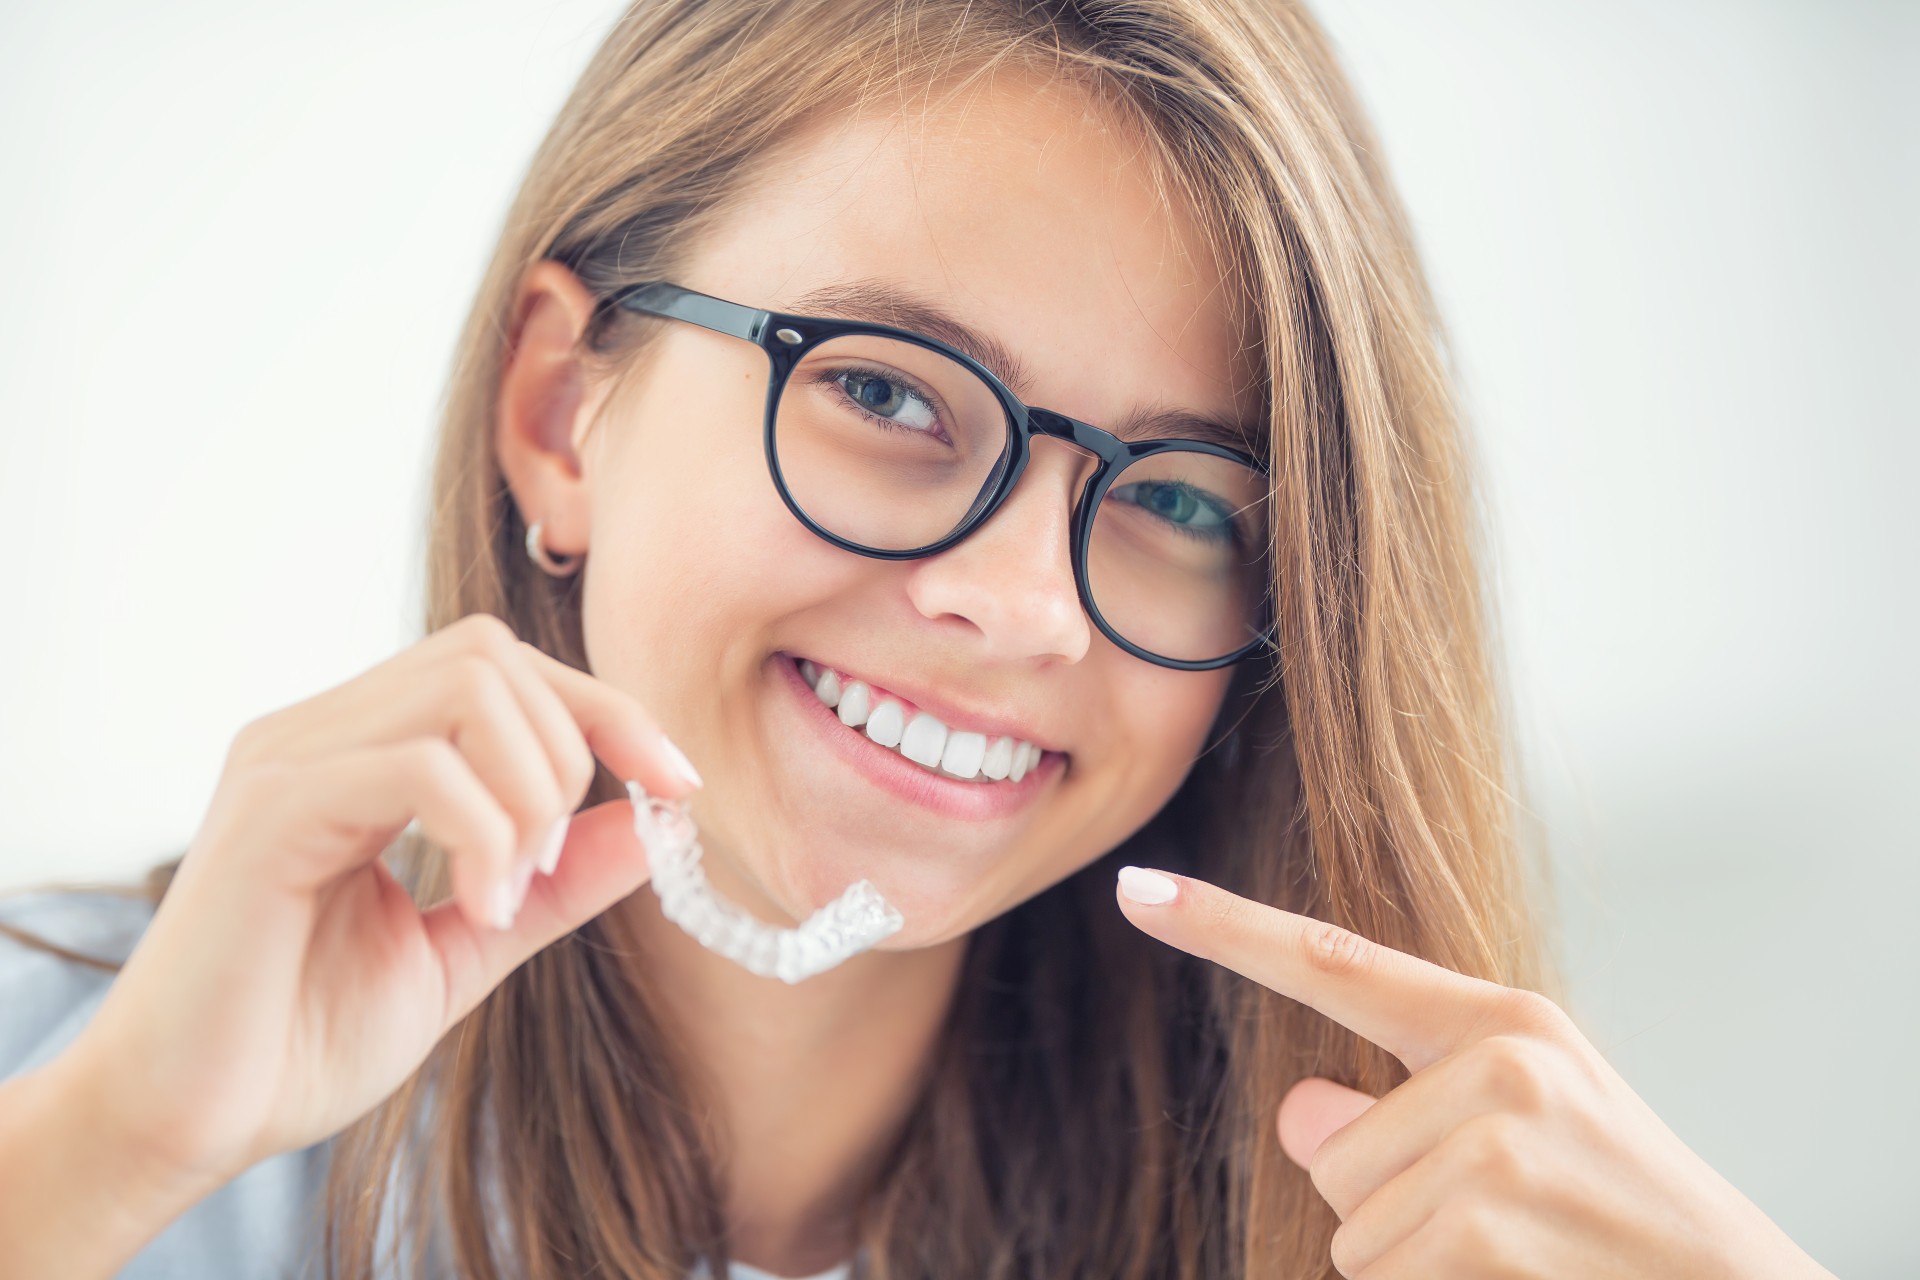 Young kid with Invisalign in hands smiling